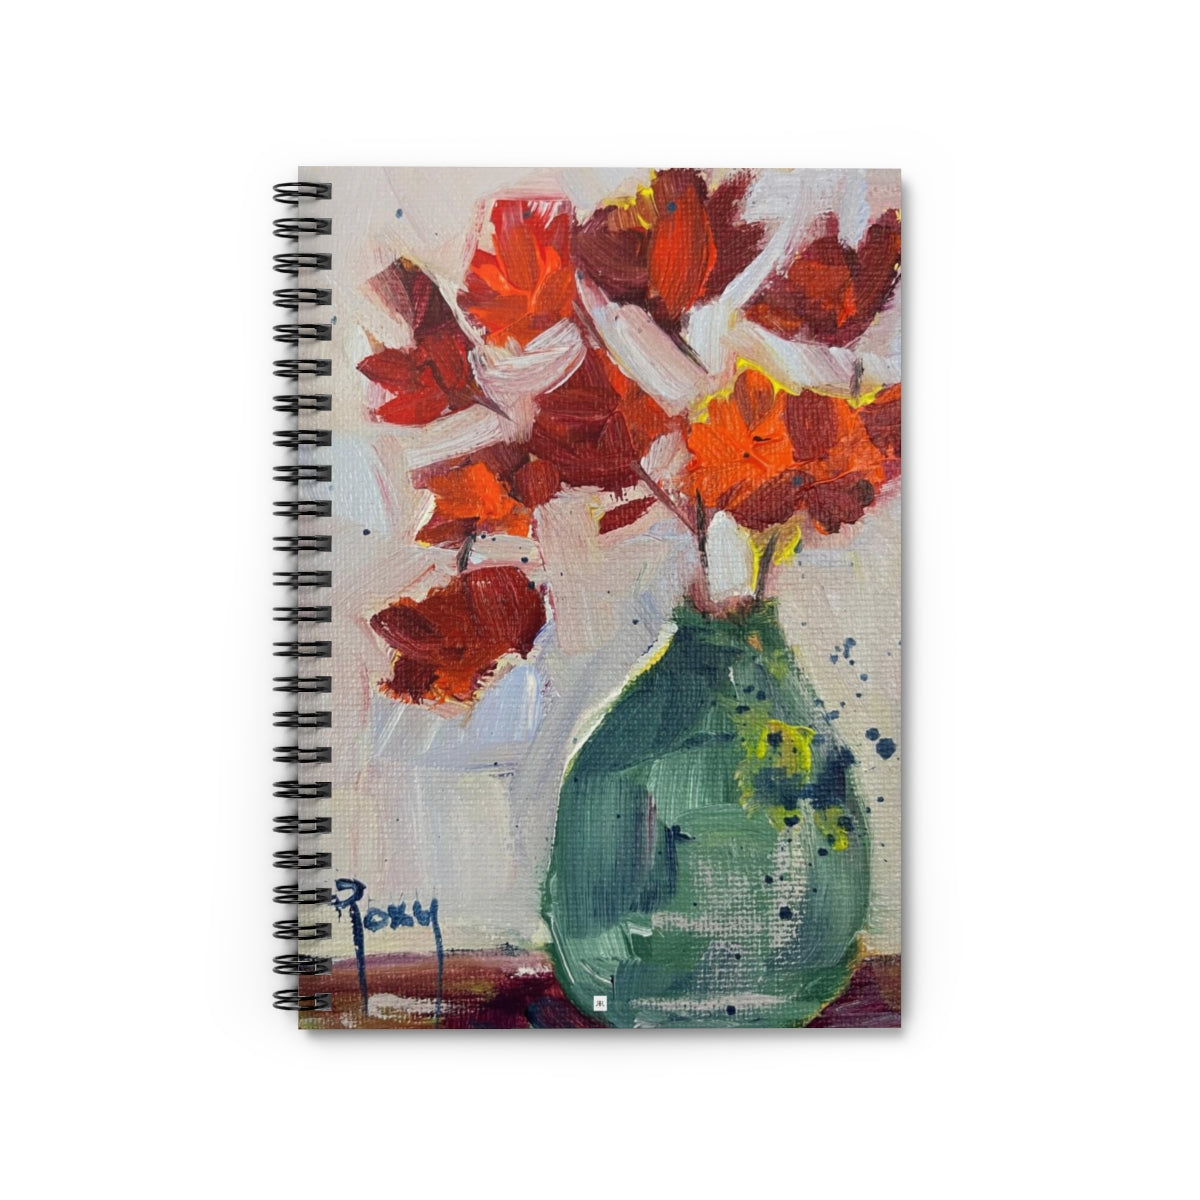 Maple Leaves in a Teal Vase Spiral Notebook